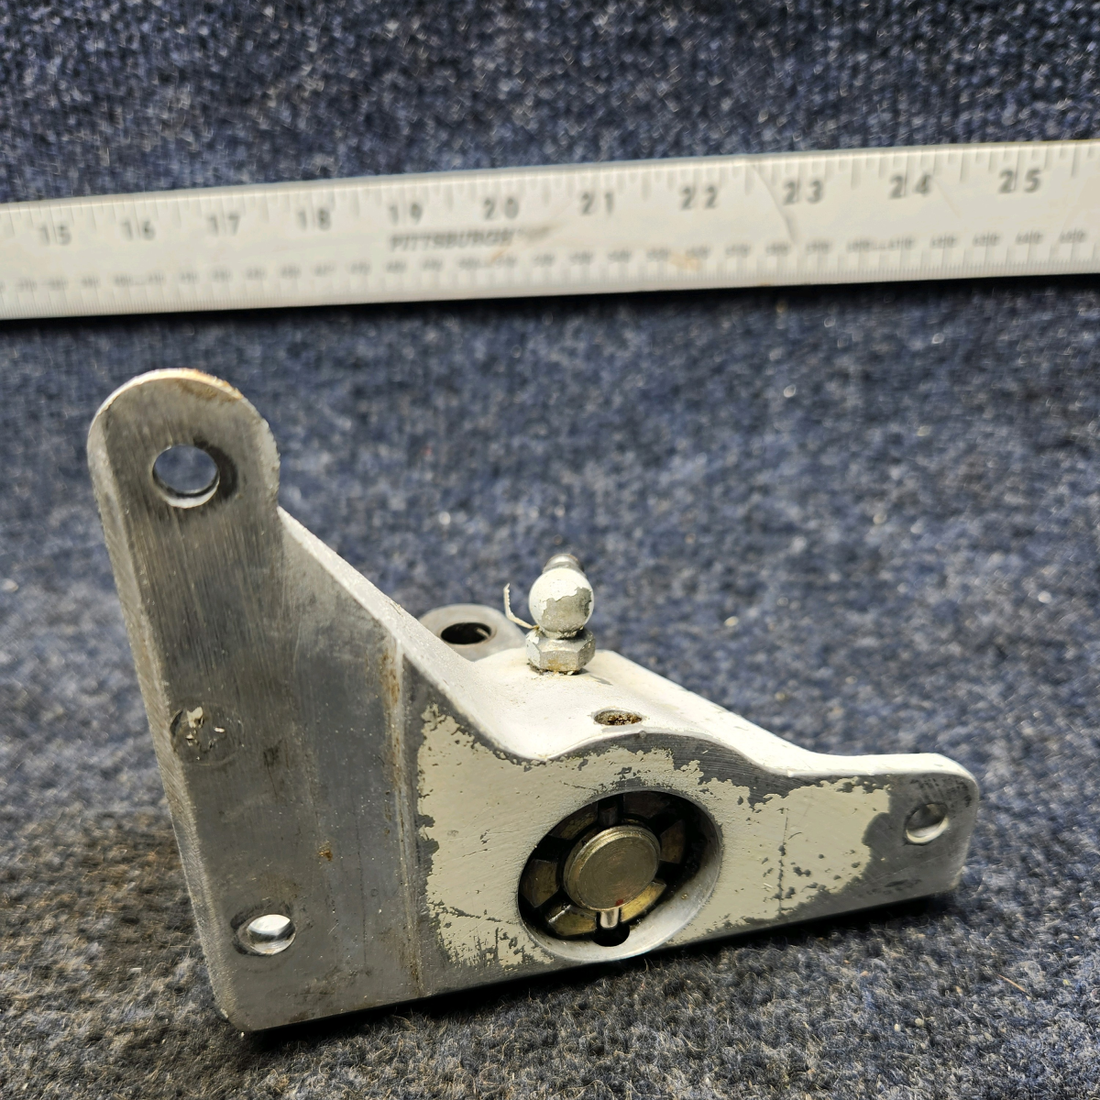 Used aircraft parts for sale, 95643-006 Piper PA32RT-300 MAIN GEAR TRUSS BRACKET ASSEMBLY LH (3/8")